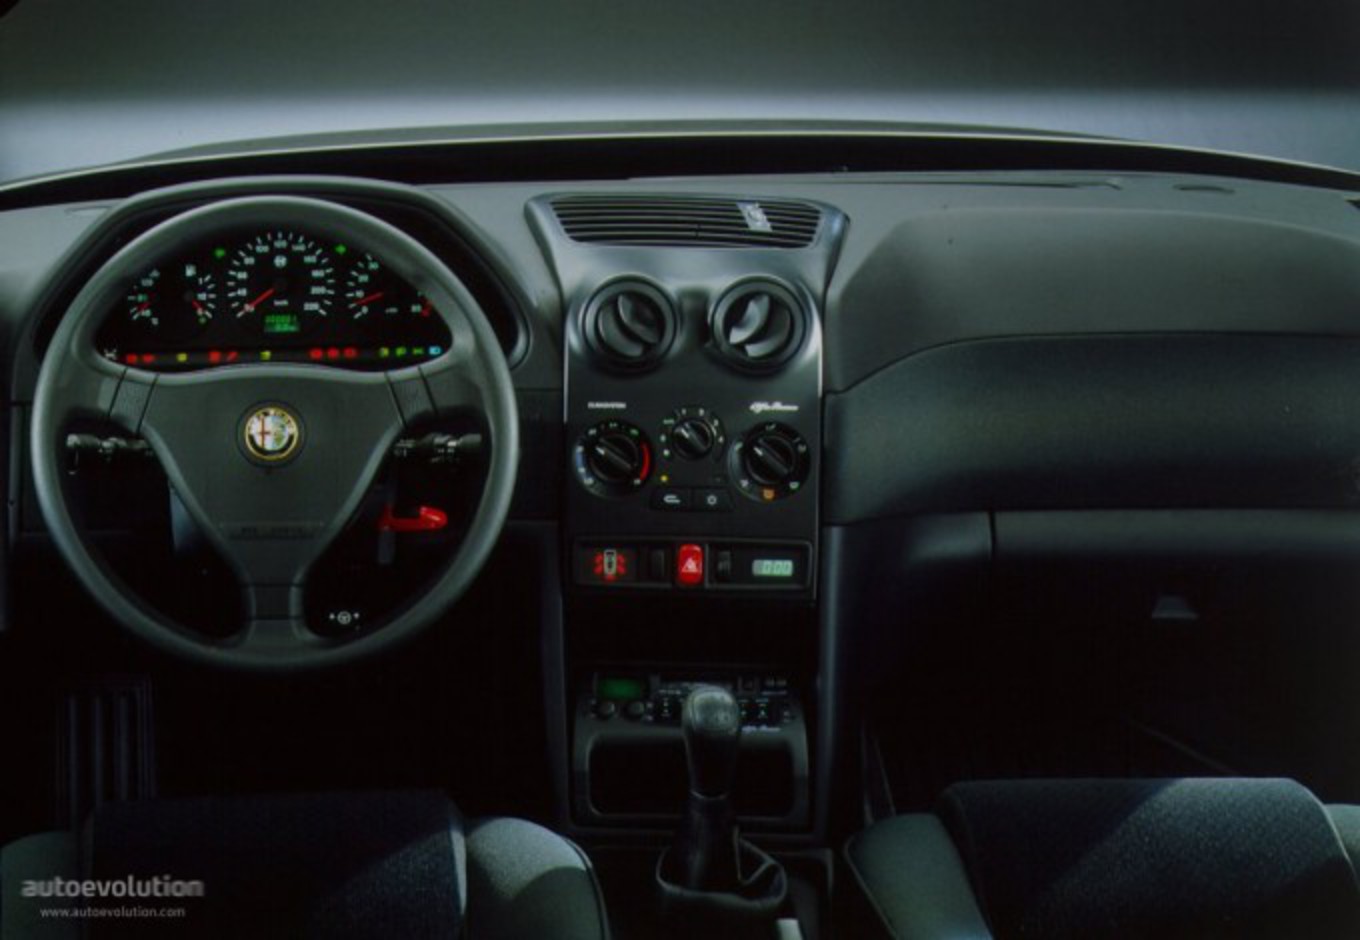 Alfa Romeo 146. There are a total of 17 models manufactured by Alfa Romeo.